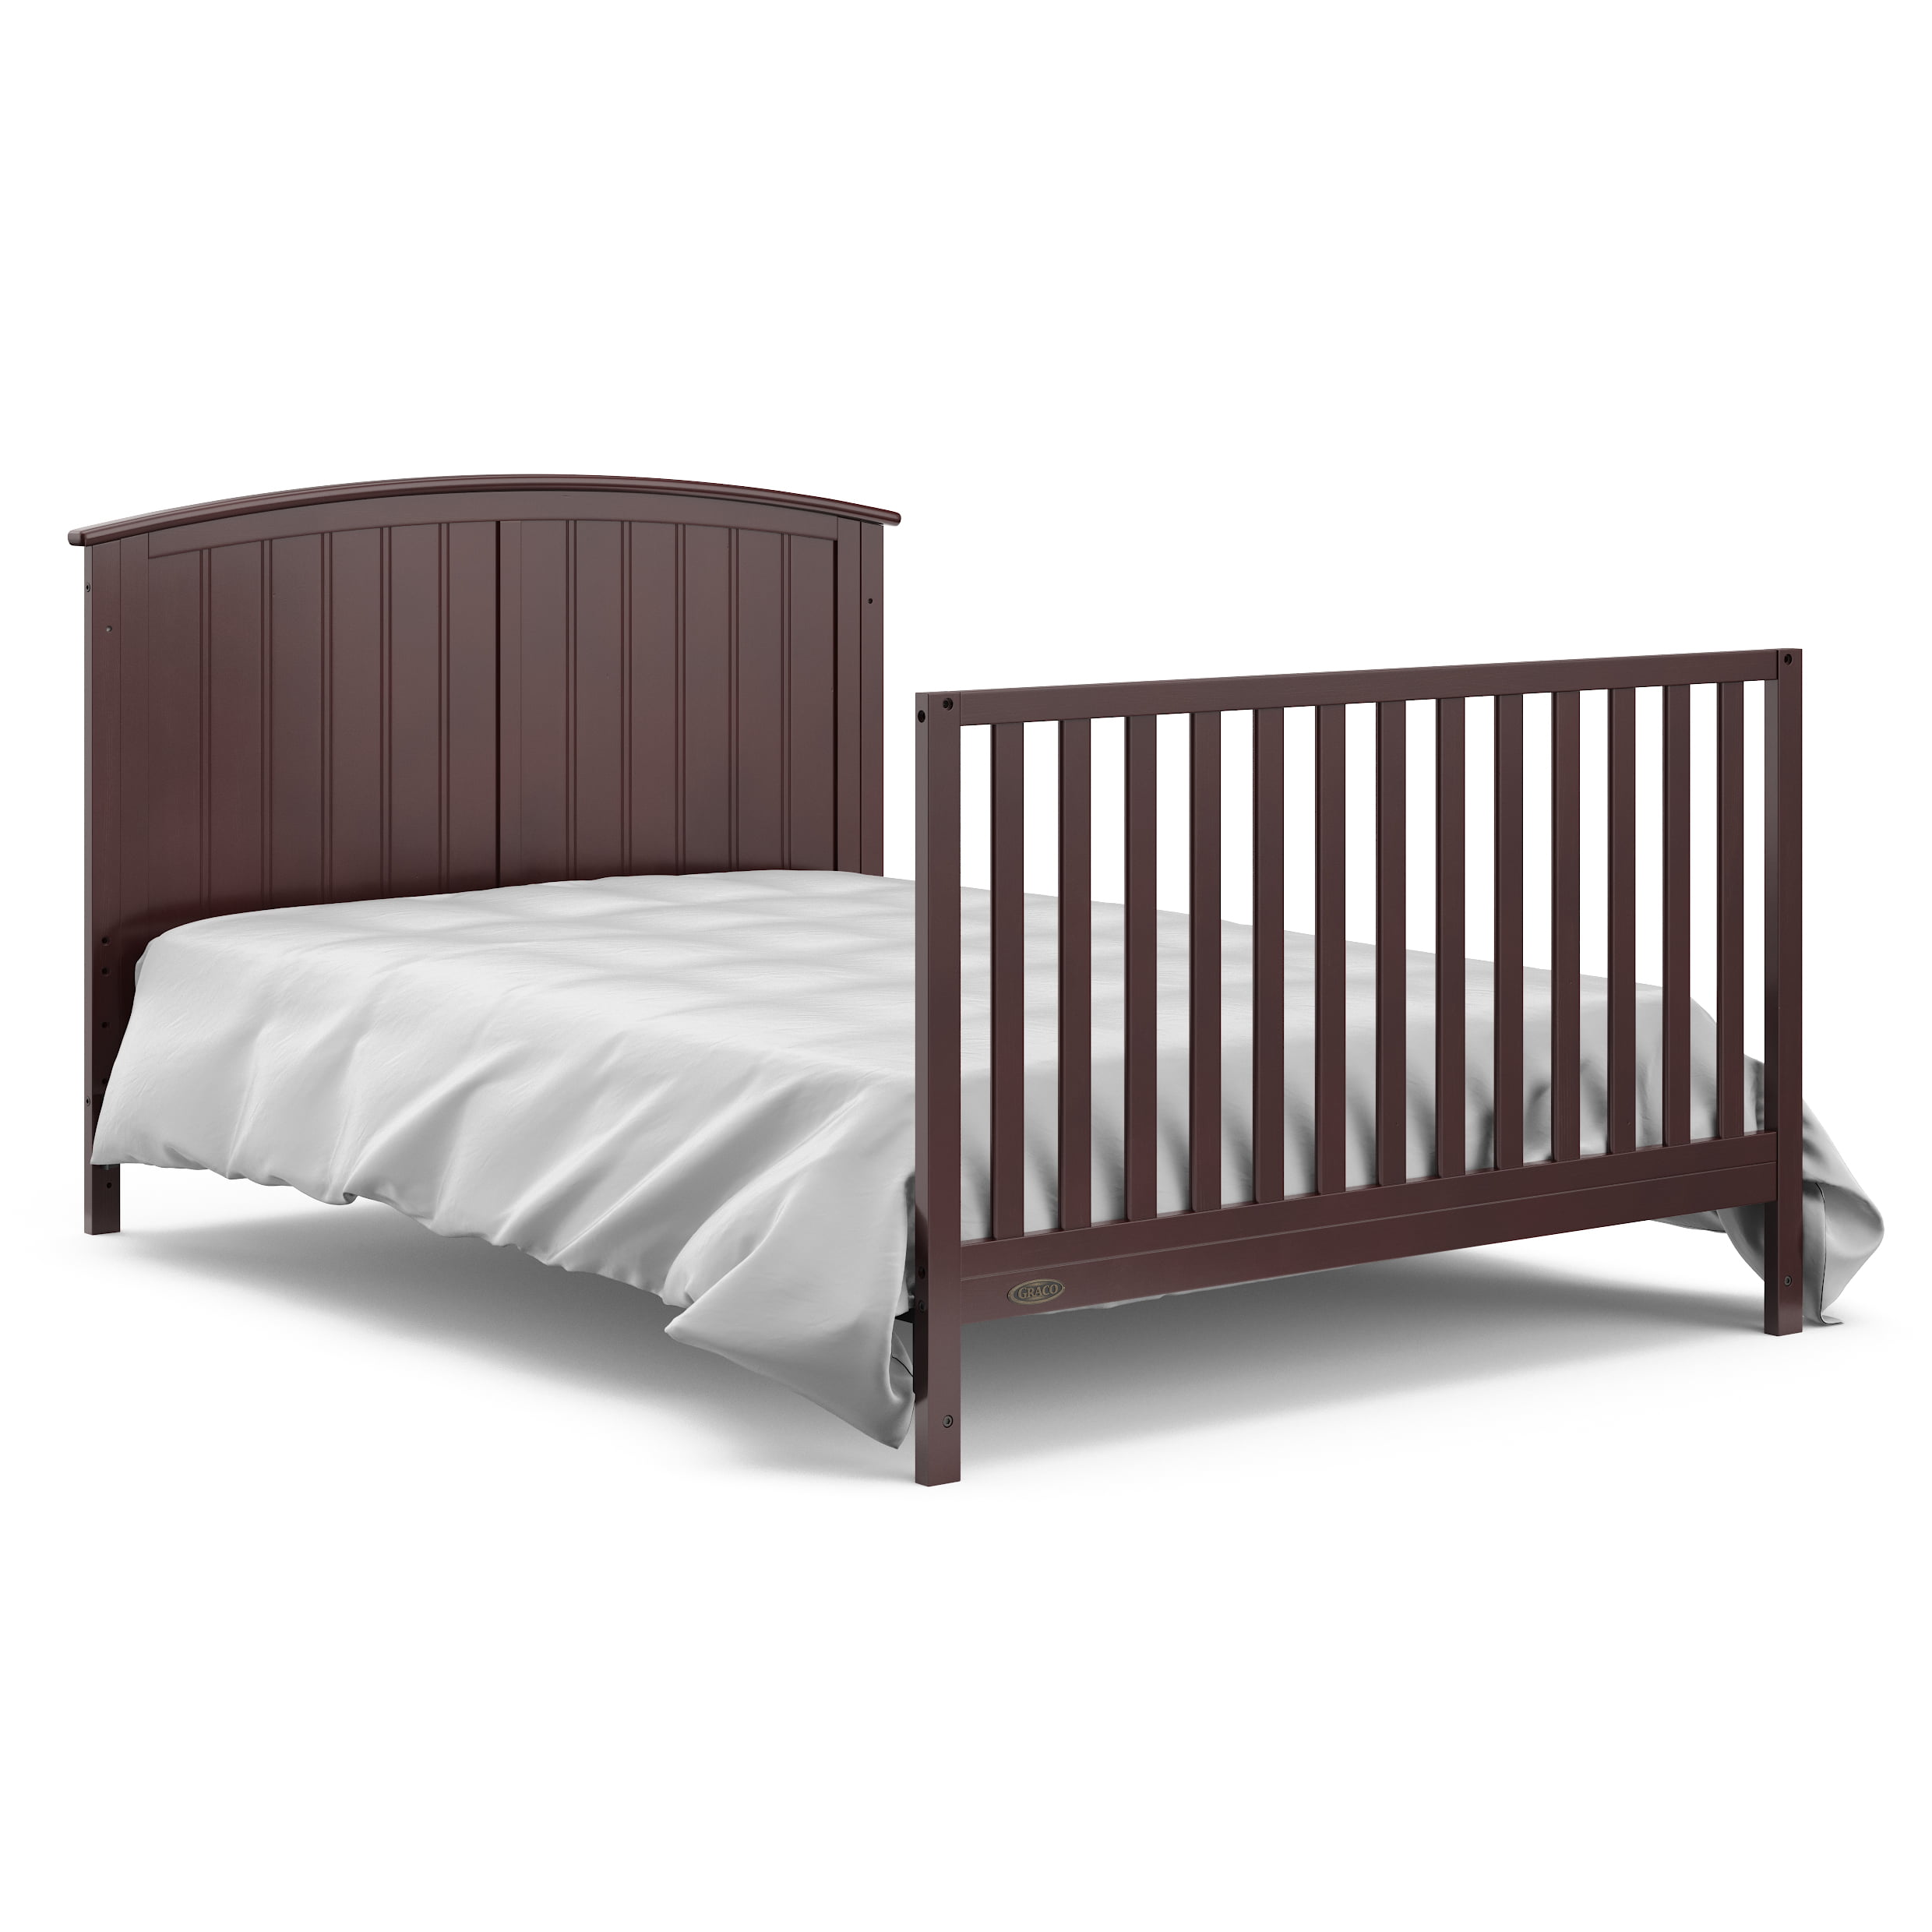 jasper convertible crib with drawer instructions